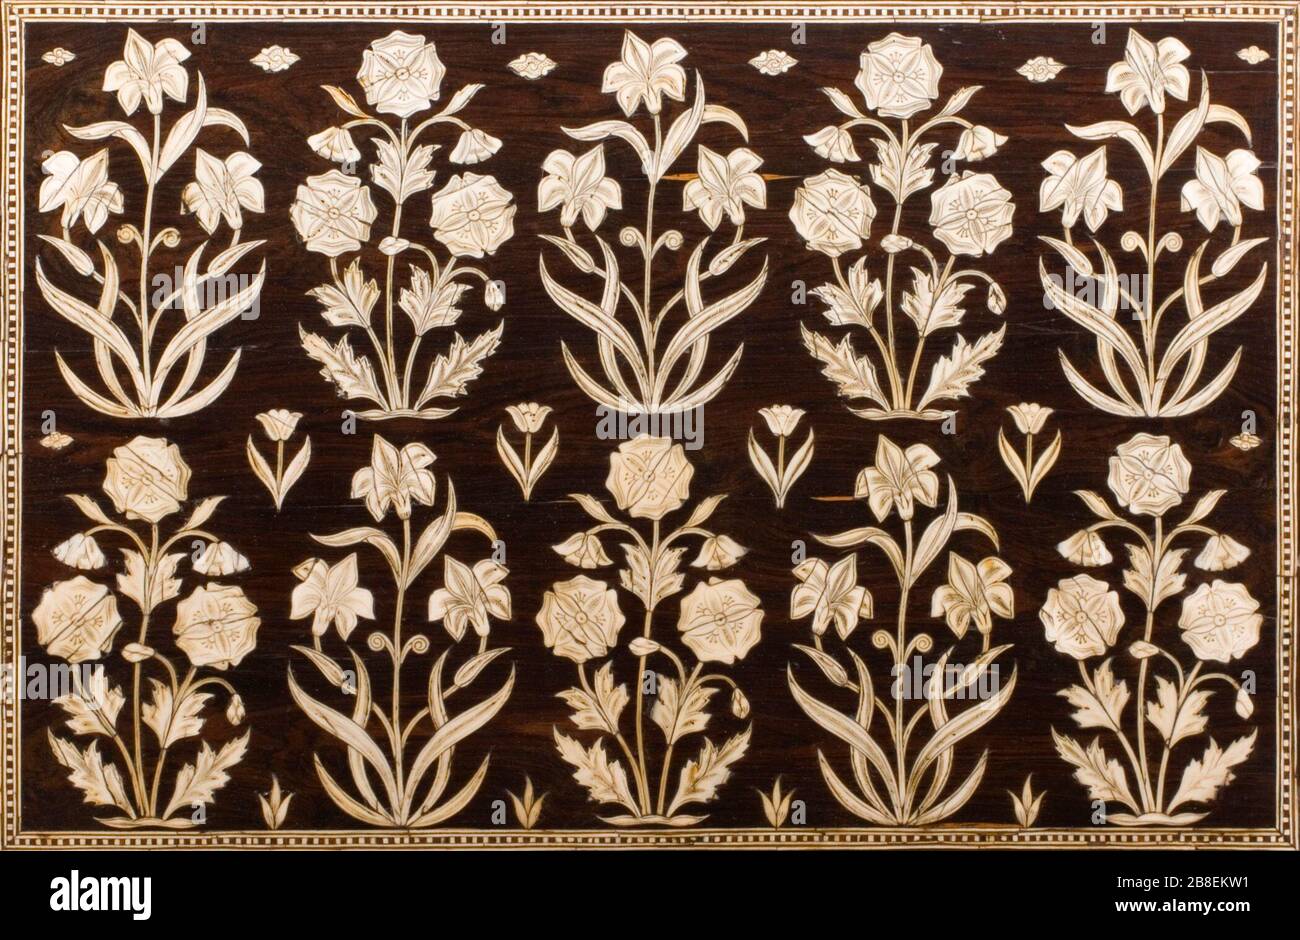 'Fall-Front Cabinet (image 10 of 22); English:  India, Gujarat or Pakistan, Sindh, circa 1650-1670 Furnishings; Furniture Rosewood inlaid with ivory; brass fittings 15 1/8 x 21 3/4 x 16 in. (38.42 x 55.25 x 40.64 cm) Purchased with funds provided by Jane and Marc Nathanson, Bill and Dee Grinnell, Greg and Mechas Grinnell, and Marilyn B. and Calvin B. Gross through the 2007 Collectors Committee (M.2007.56) South and Southeast Asian Art Currently on public view: Ahmanson Building, floor 4; between circa 1650 and circa 1670 date QS:P571,+1650-00-00T00:00:00Z/7,P1319,+1650-00-00T00:00:00Z/9,P1326, Stock Photo